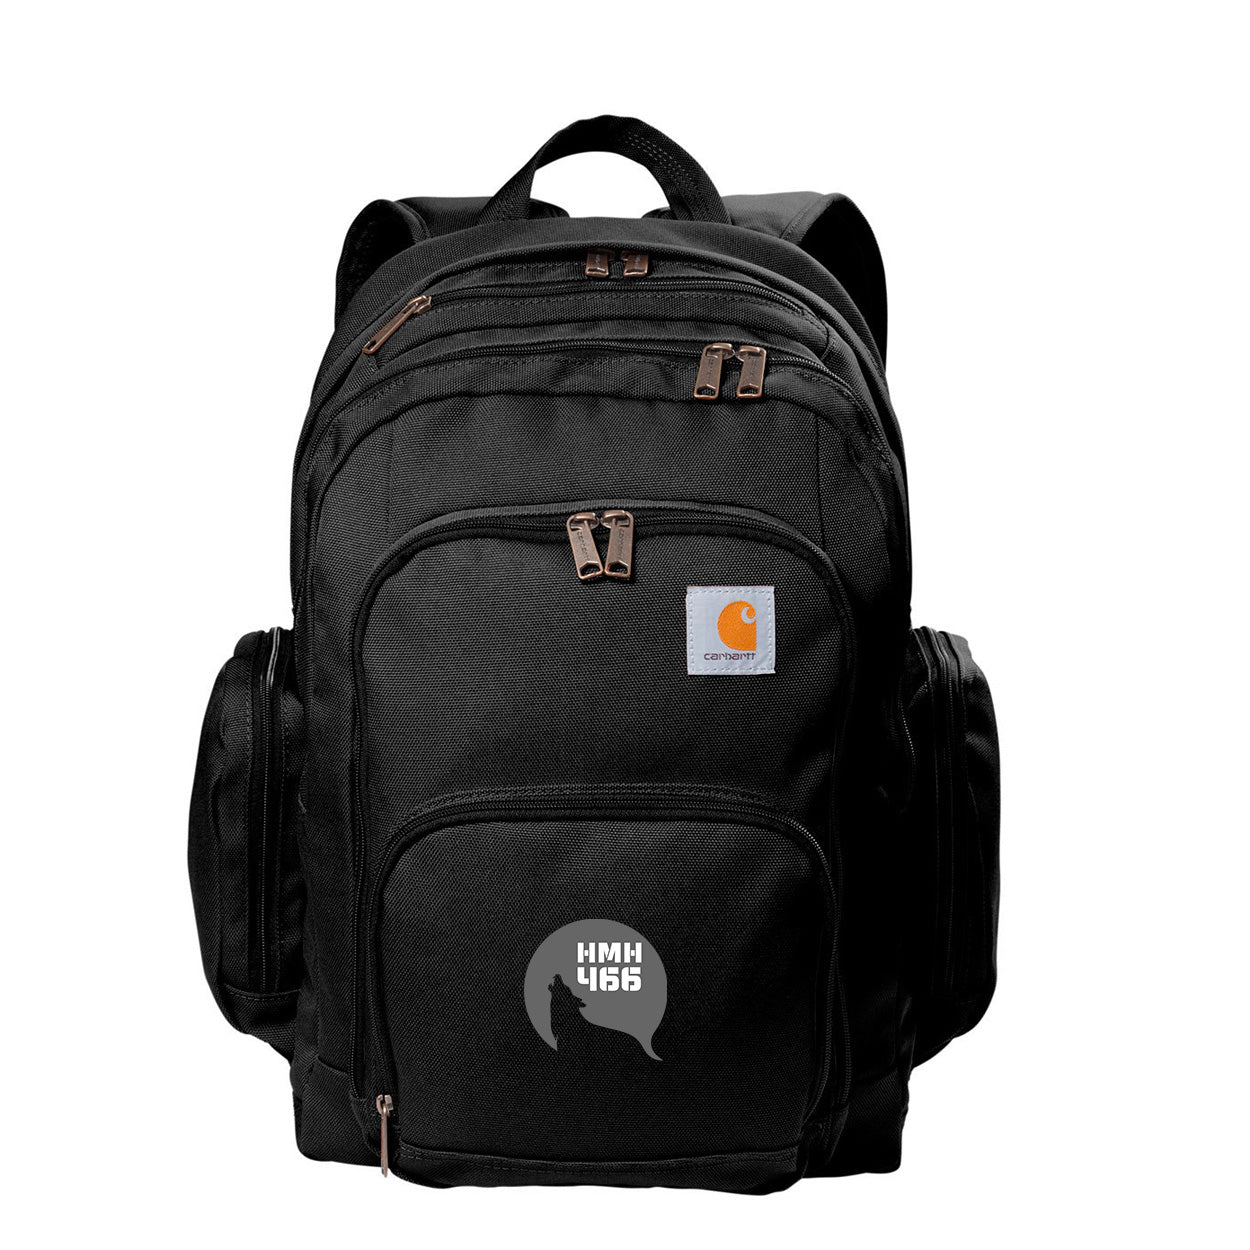 HMH-466 NIGHT CARHARTT  FOUNDRY SERIES PRO BACKPACK